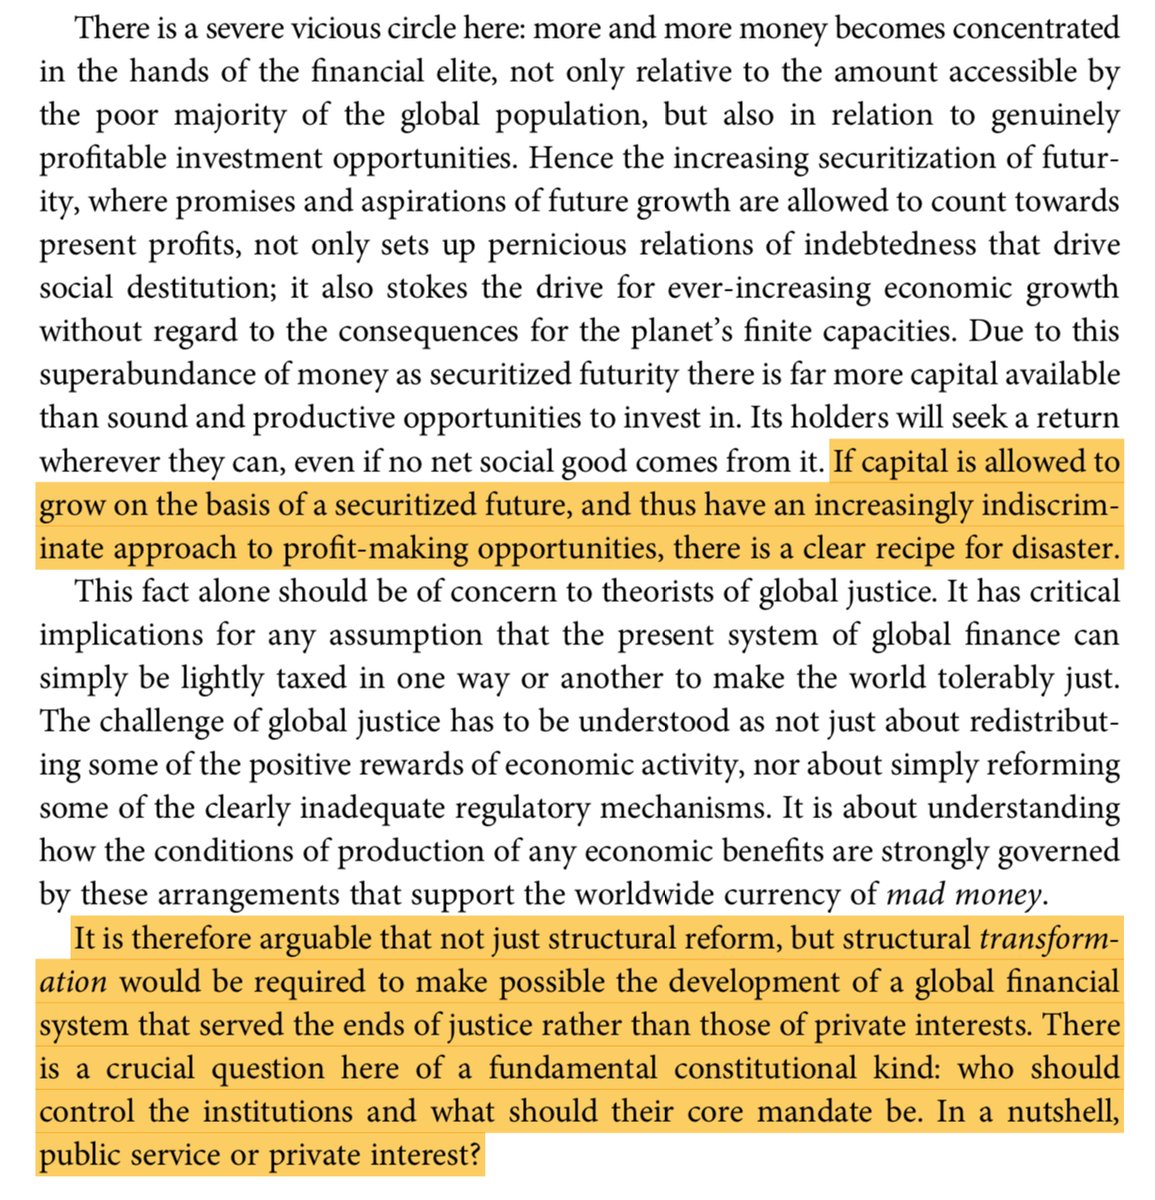 Crucial questions are who should control the institutional order & what should their core mandate be- public service or private interest? Allowing capital to grow on the basis of a securitized future, with indiscriminate profit-making opportunities, is a recipe for disaster.